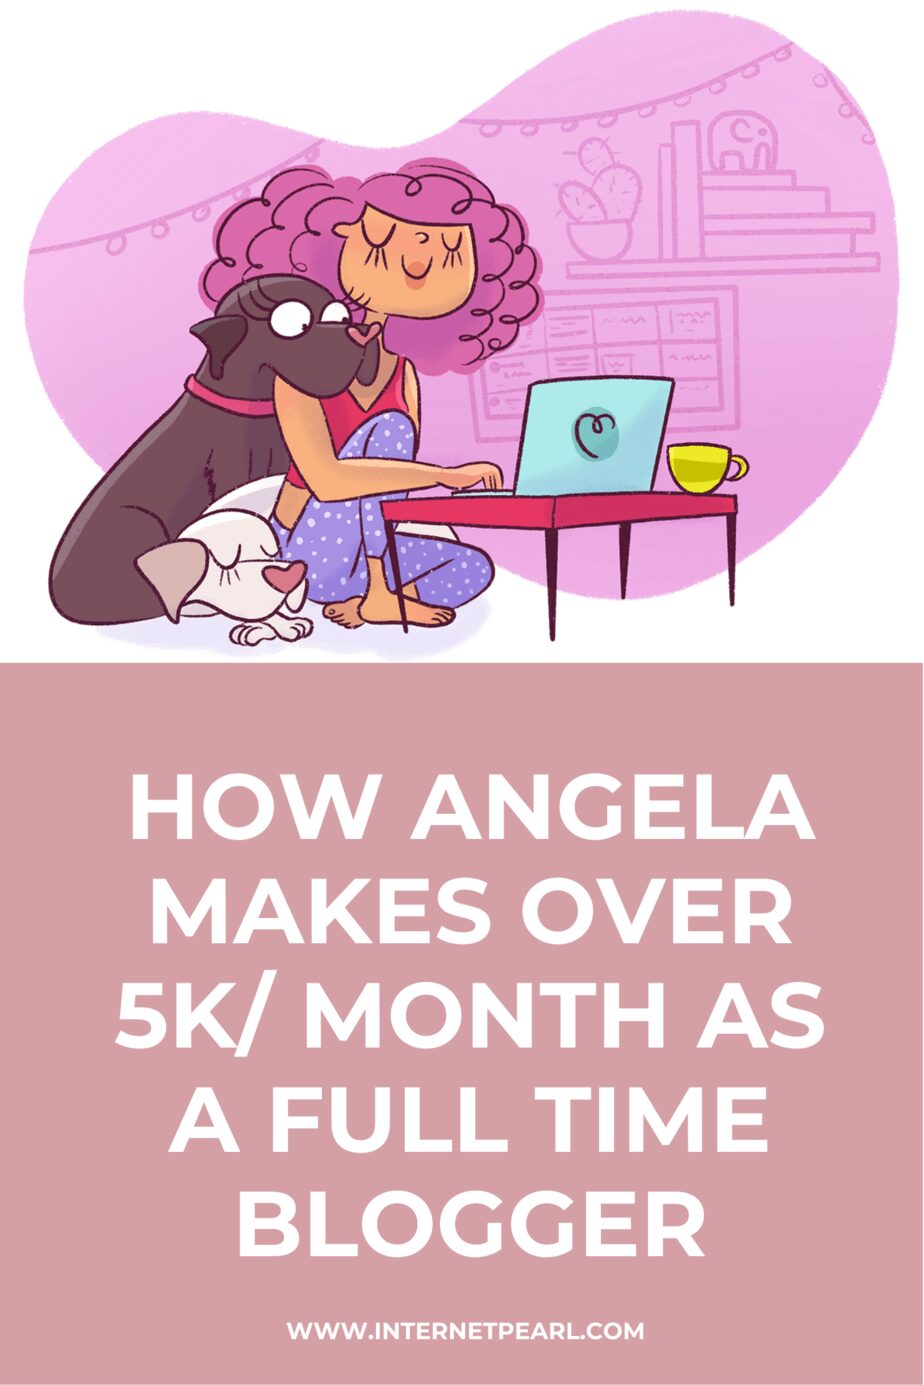 How Angela Makes Over $5K/Month as a Full-Time Blogger